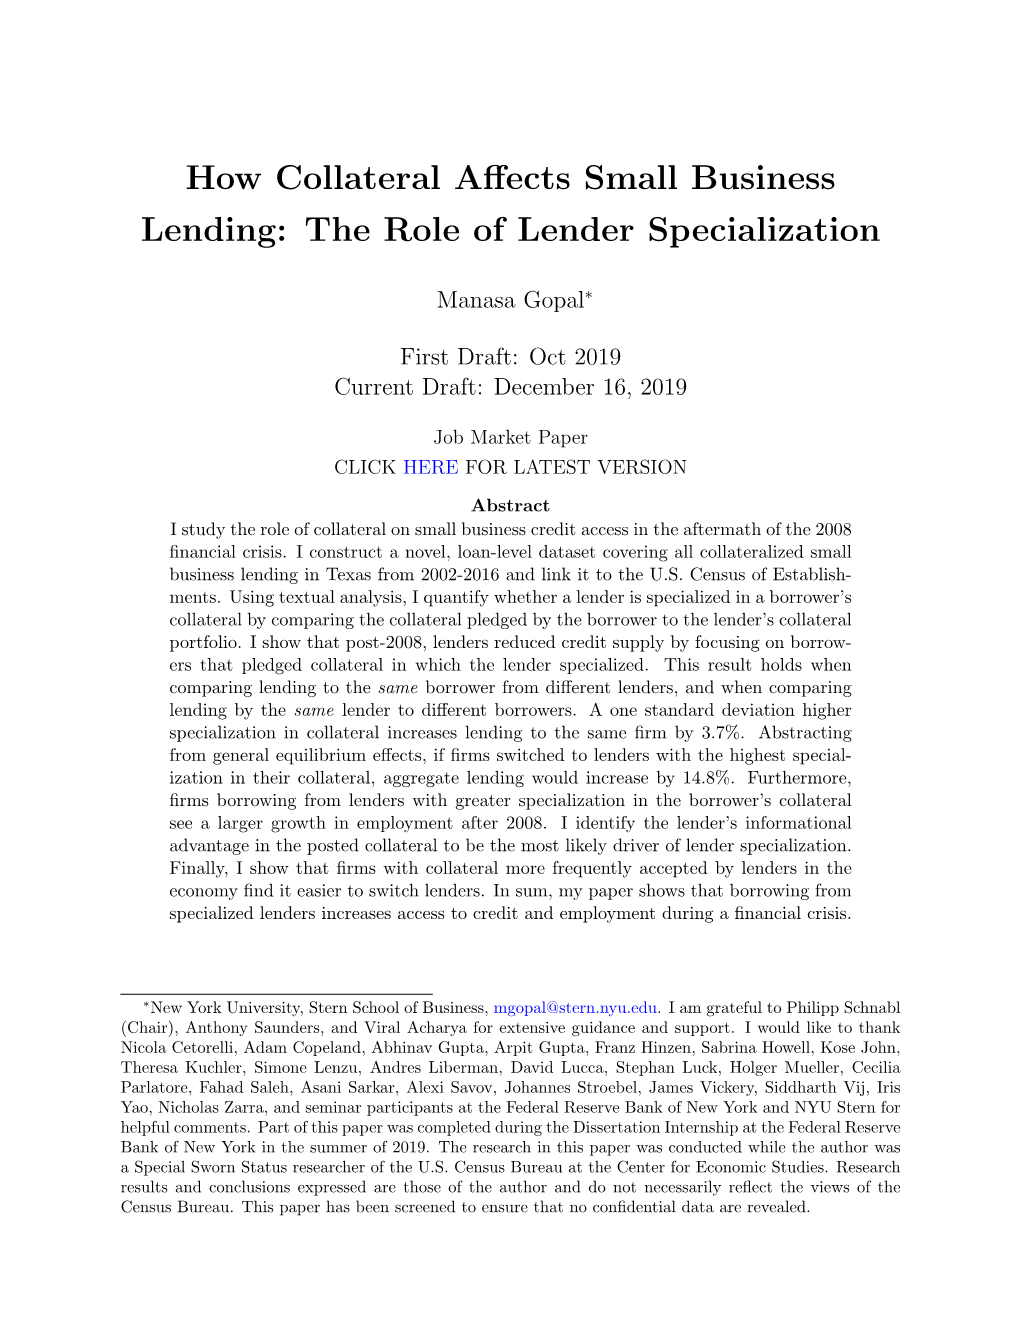 How Collateral Affects Small Business Lending